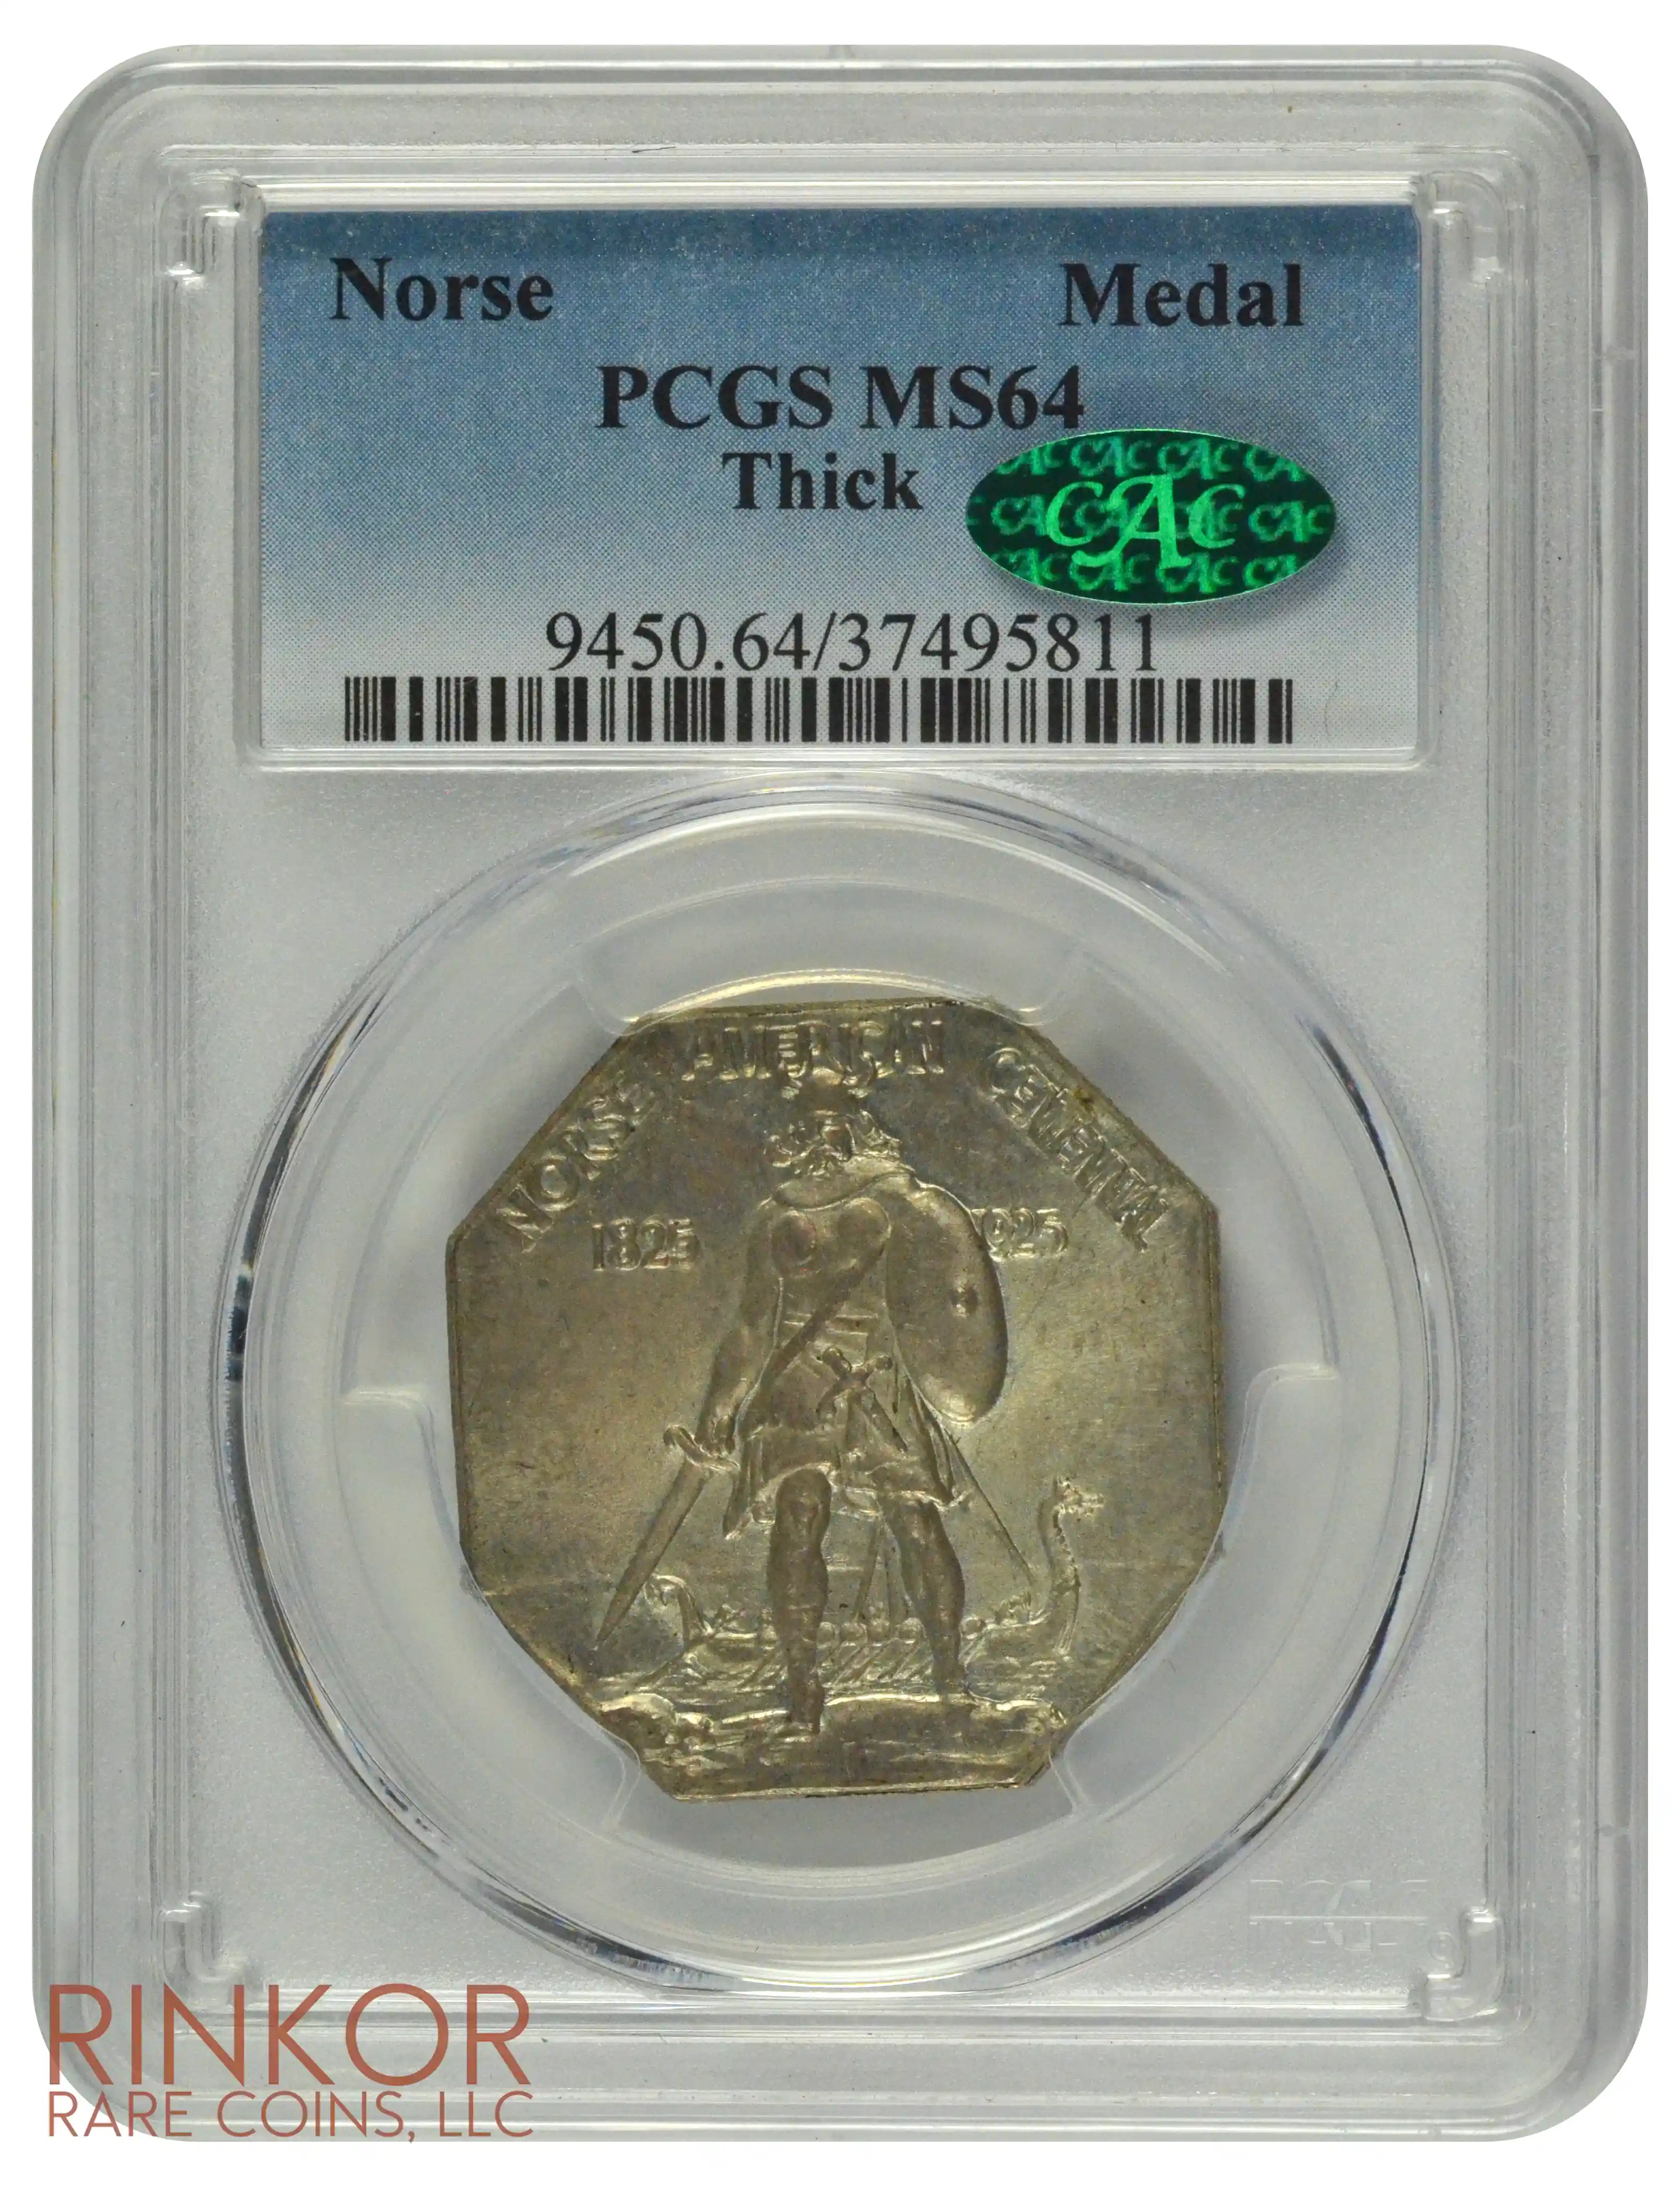 1925 Norse Medal Thick PCGS MS 64 CAC